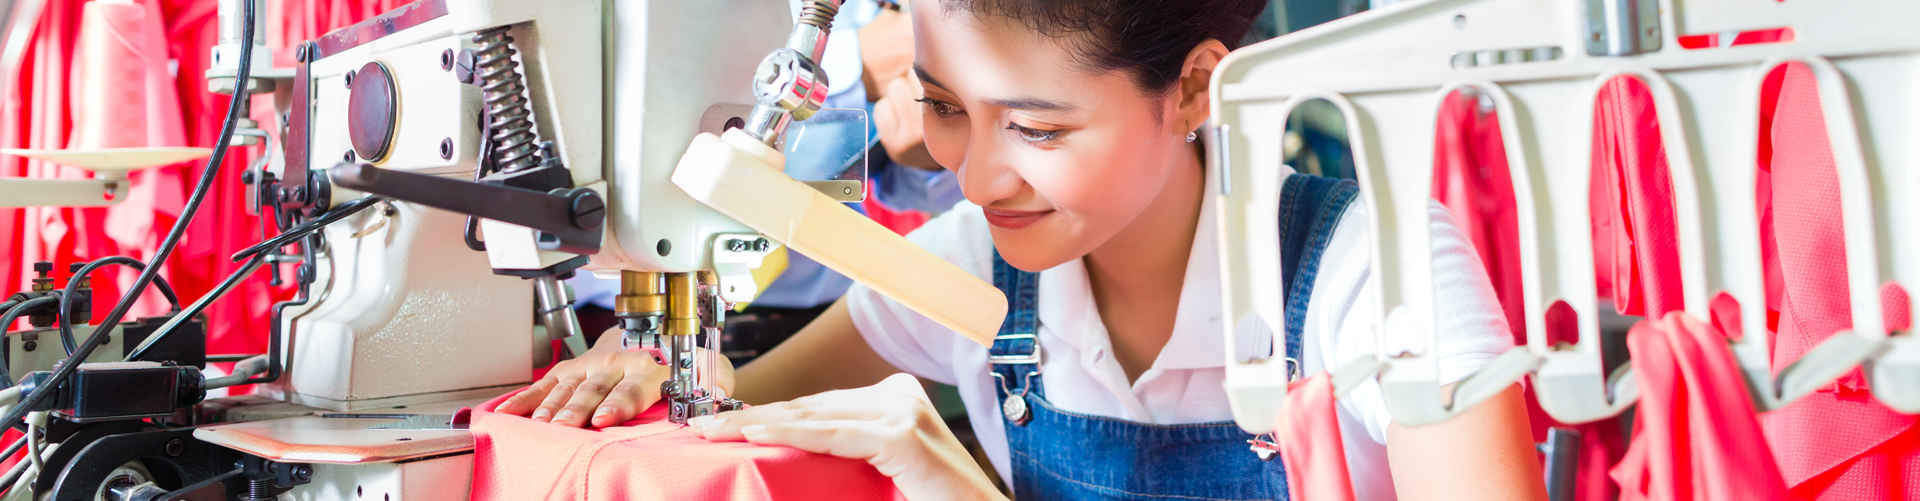 industrial sewing machine training